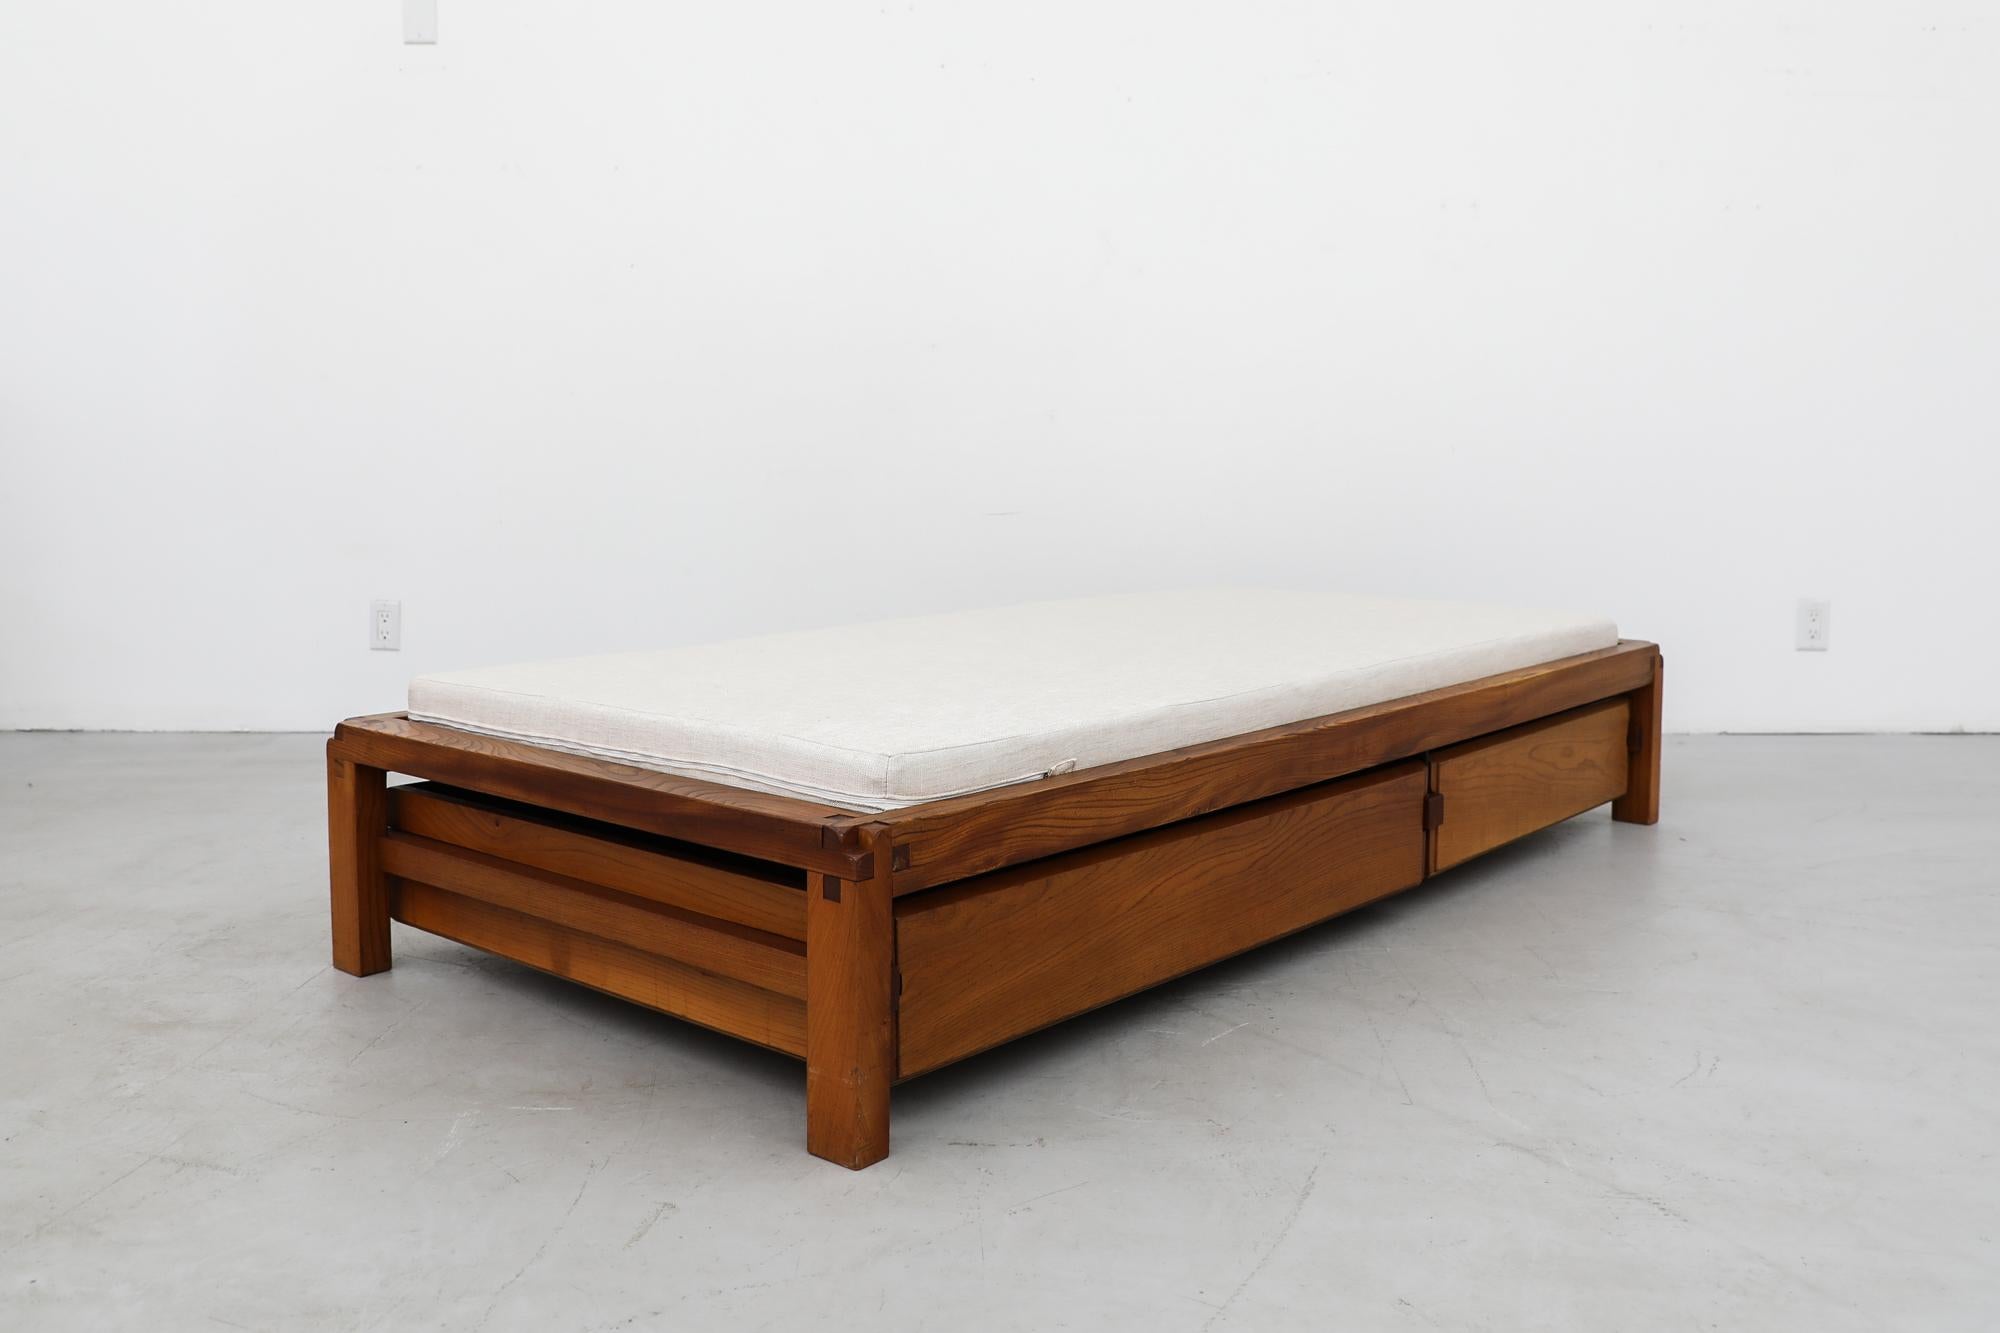 Pierre Chapo 'L03' Daybed in Elm with Storage & Newly Made Mattress, 1960s For Sale 2